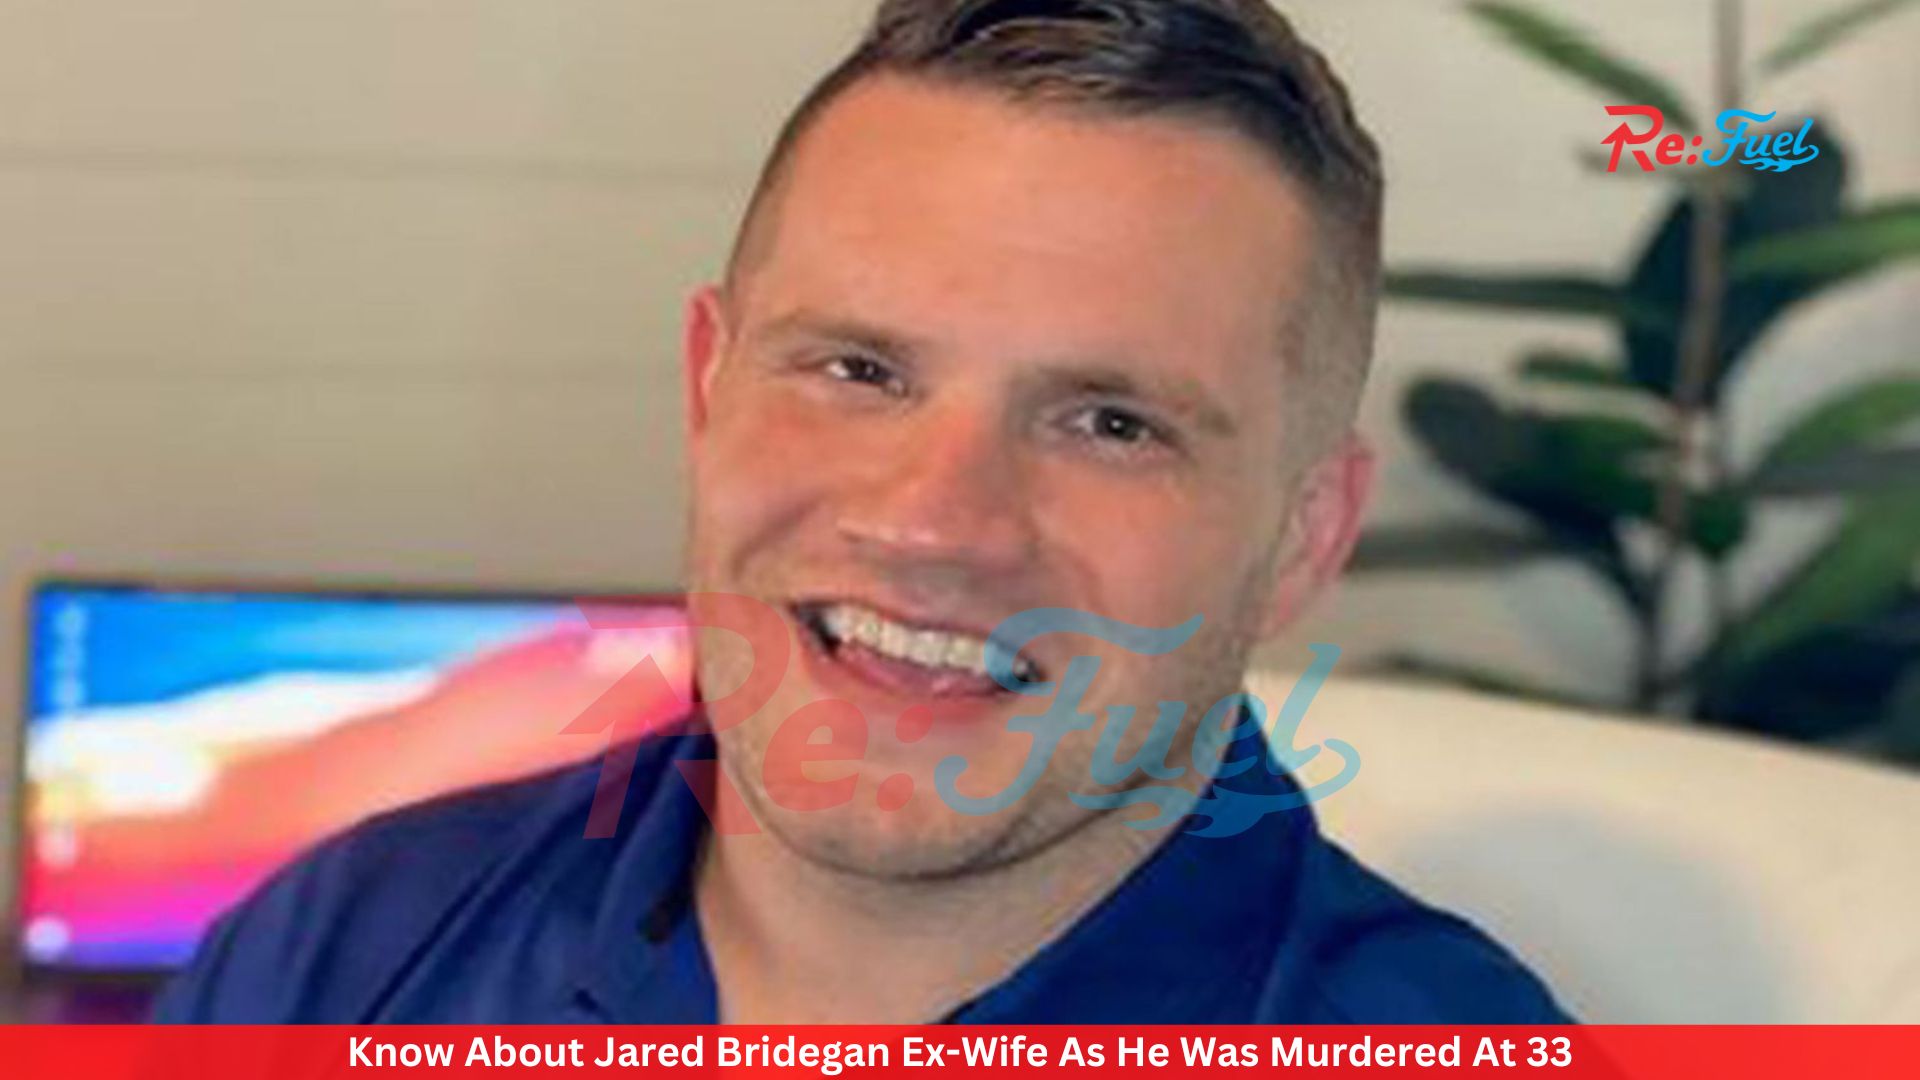 Know About Jared Bridegan Ex-Wife As He Was Murdered At 33